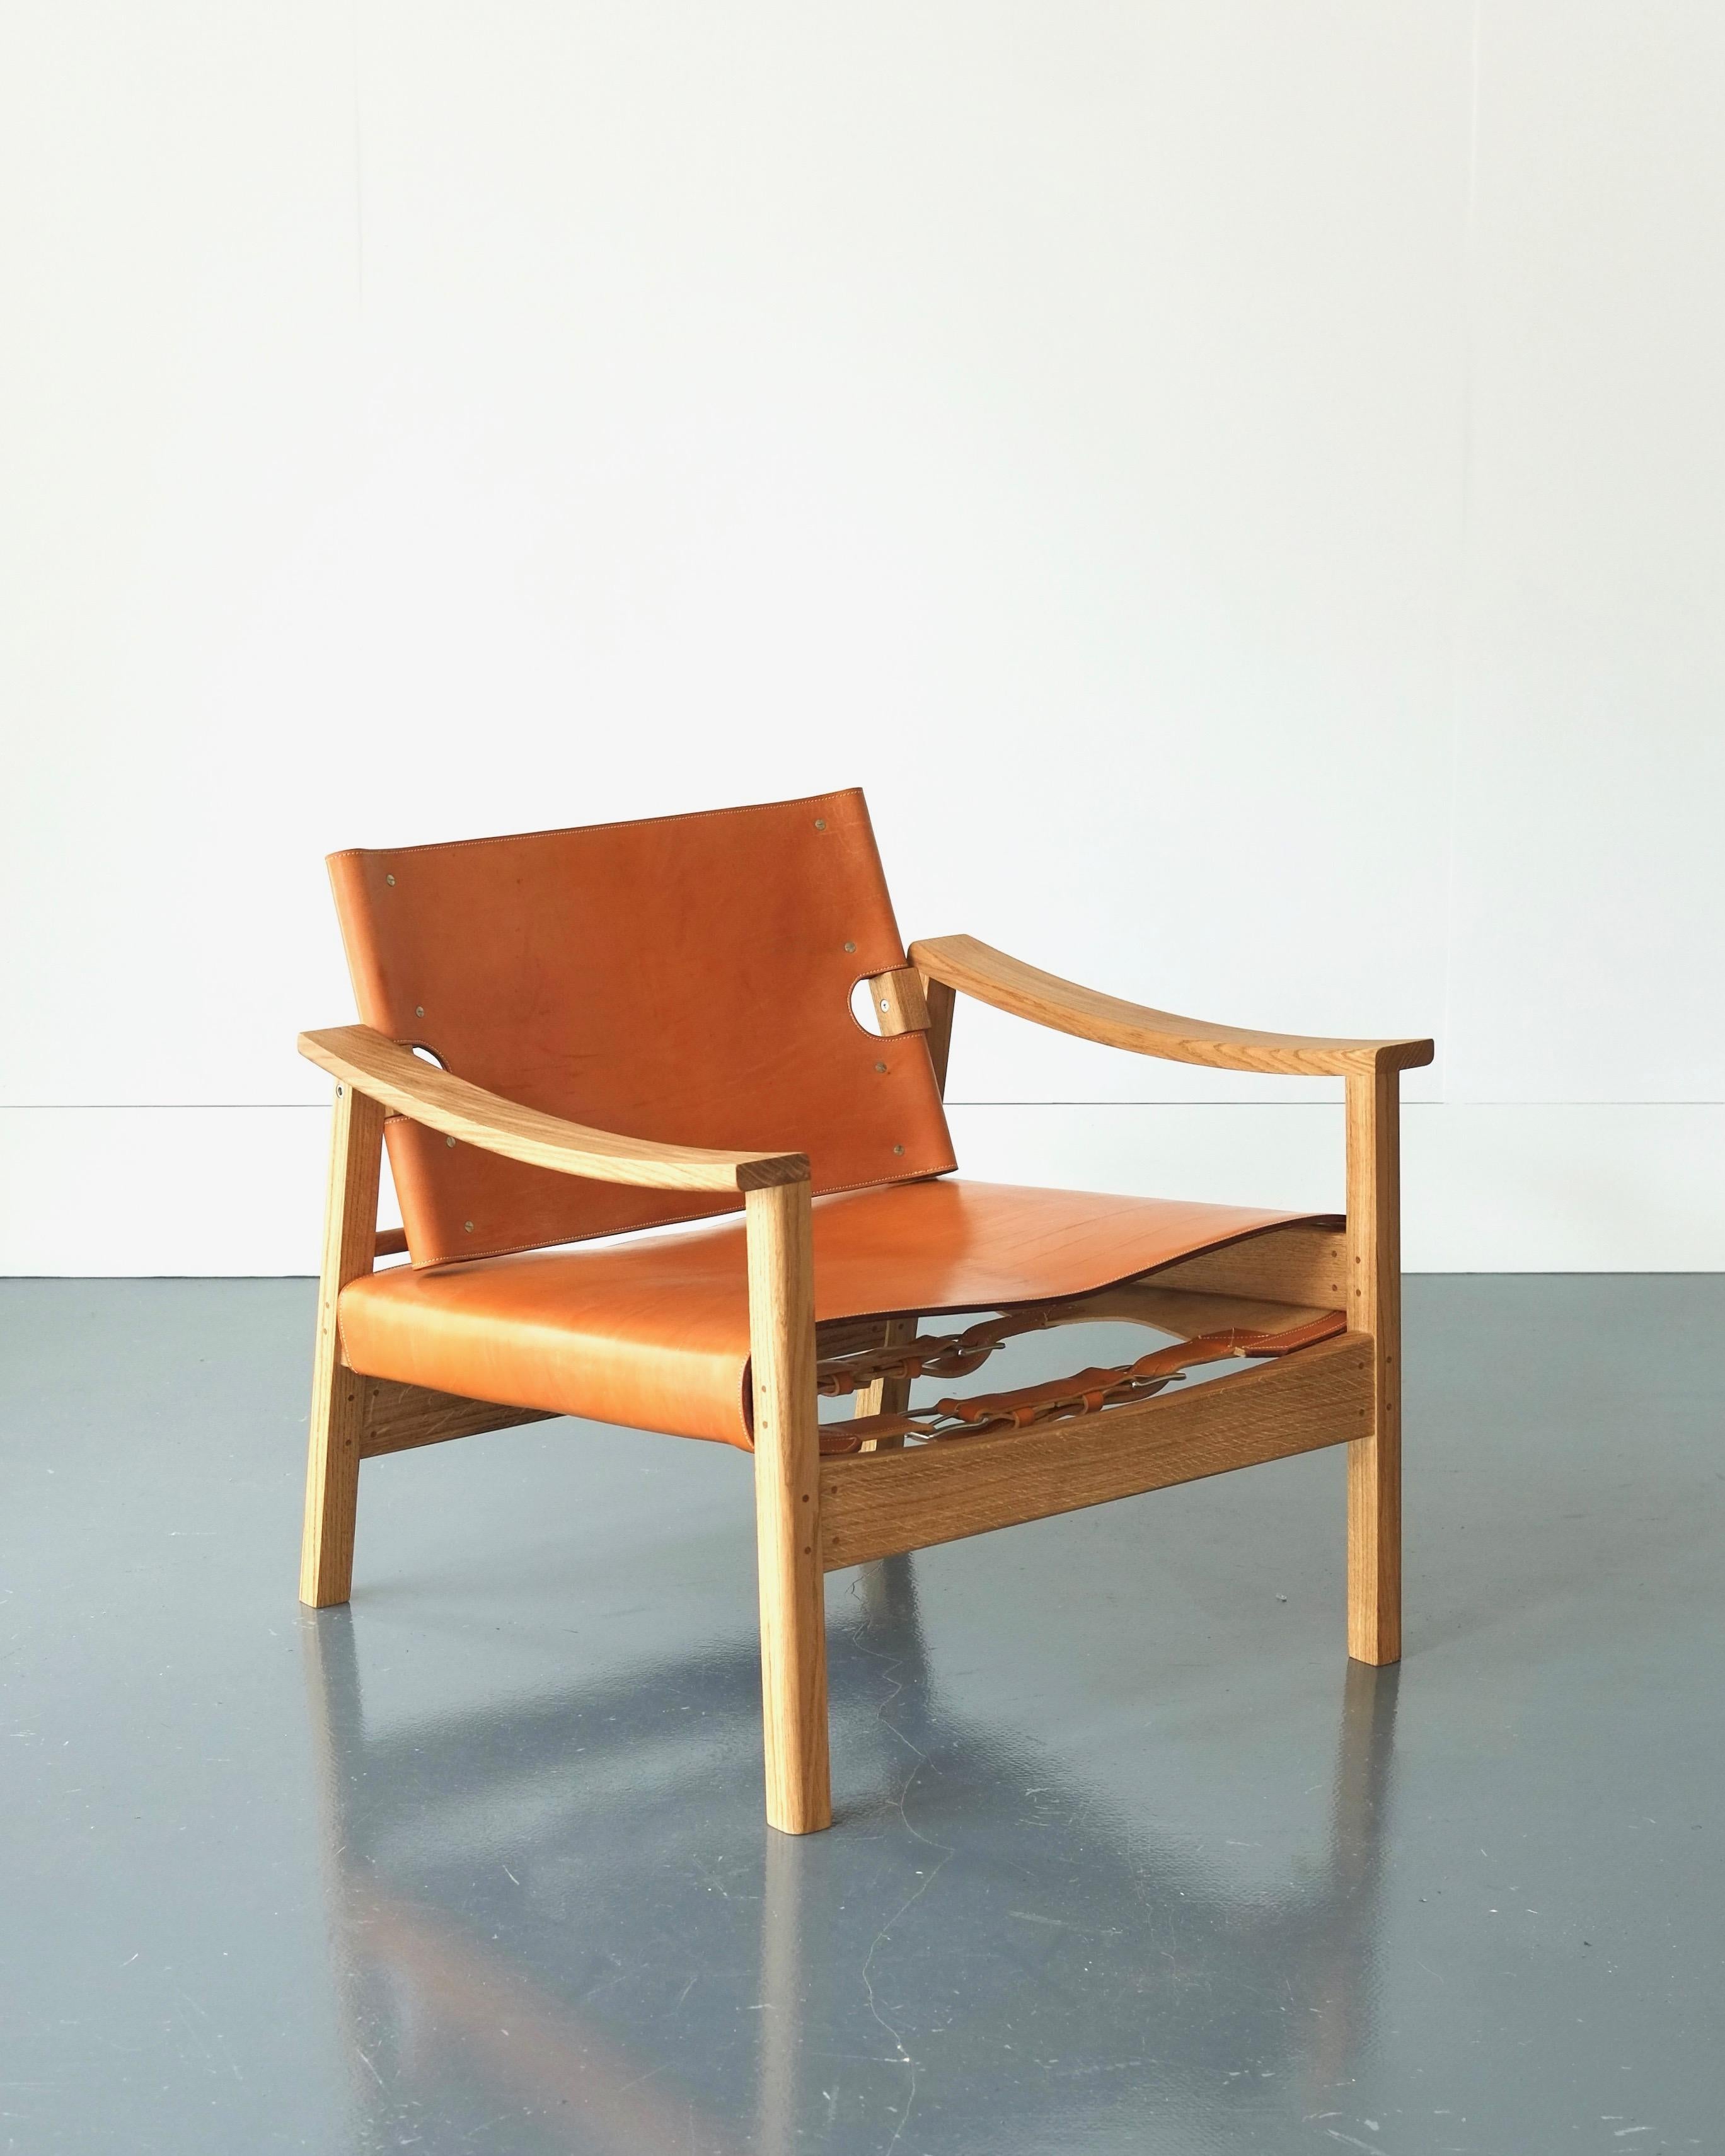 A melding of Brazilian and Scandinavian midcentury design, this lounge chair takes the classic Danish combination of oak and leather and applies it to a shapely hand joined and turned frame. Oak bark tanned bridle leather is hand cut, burnished and